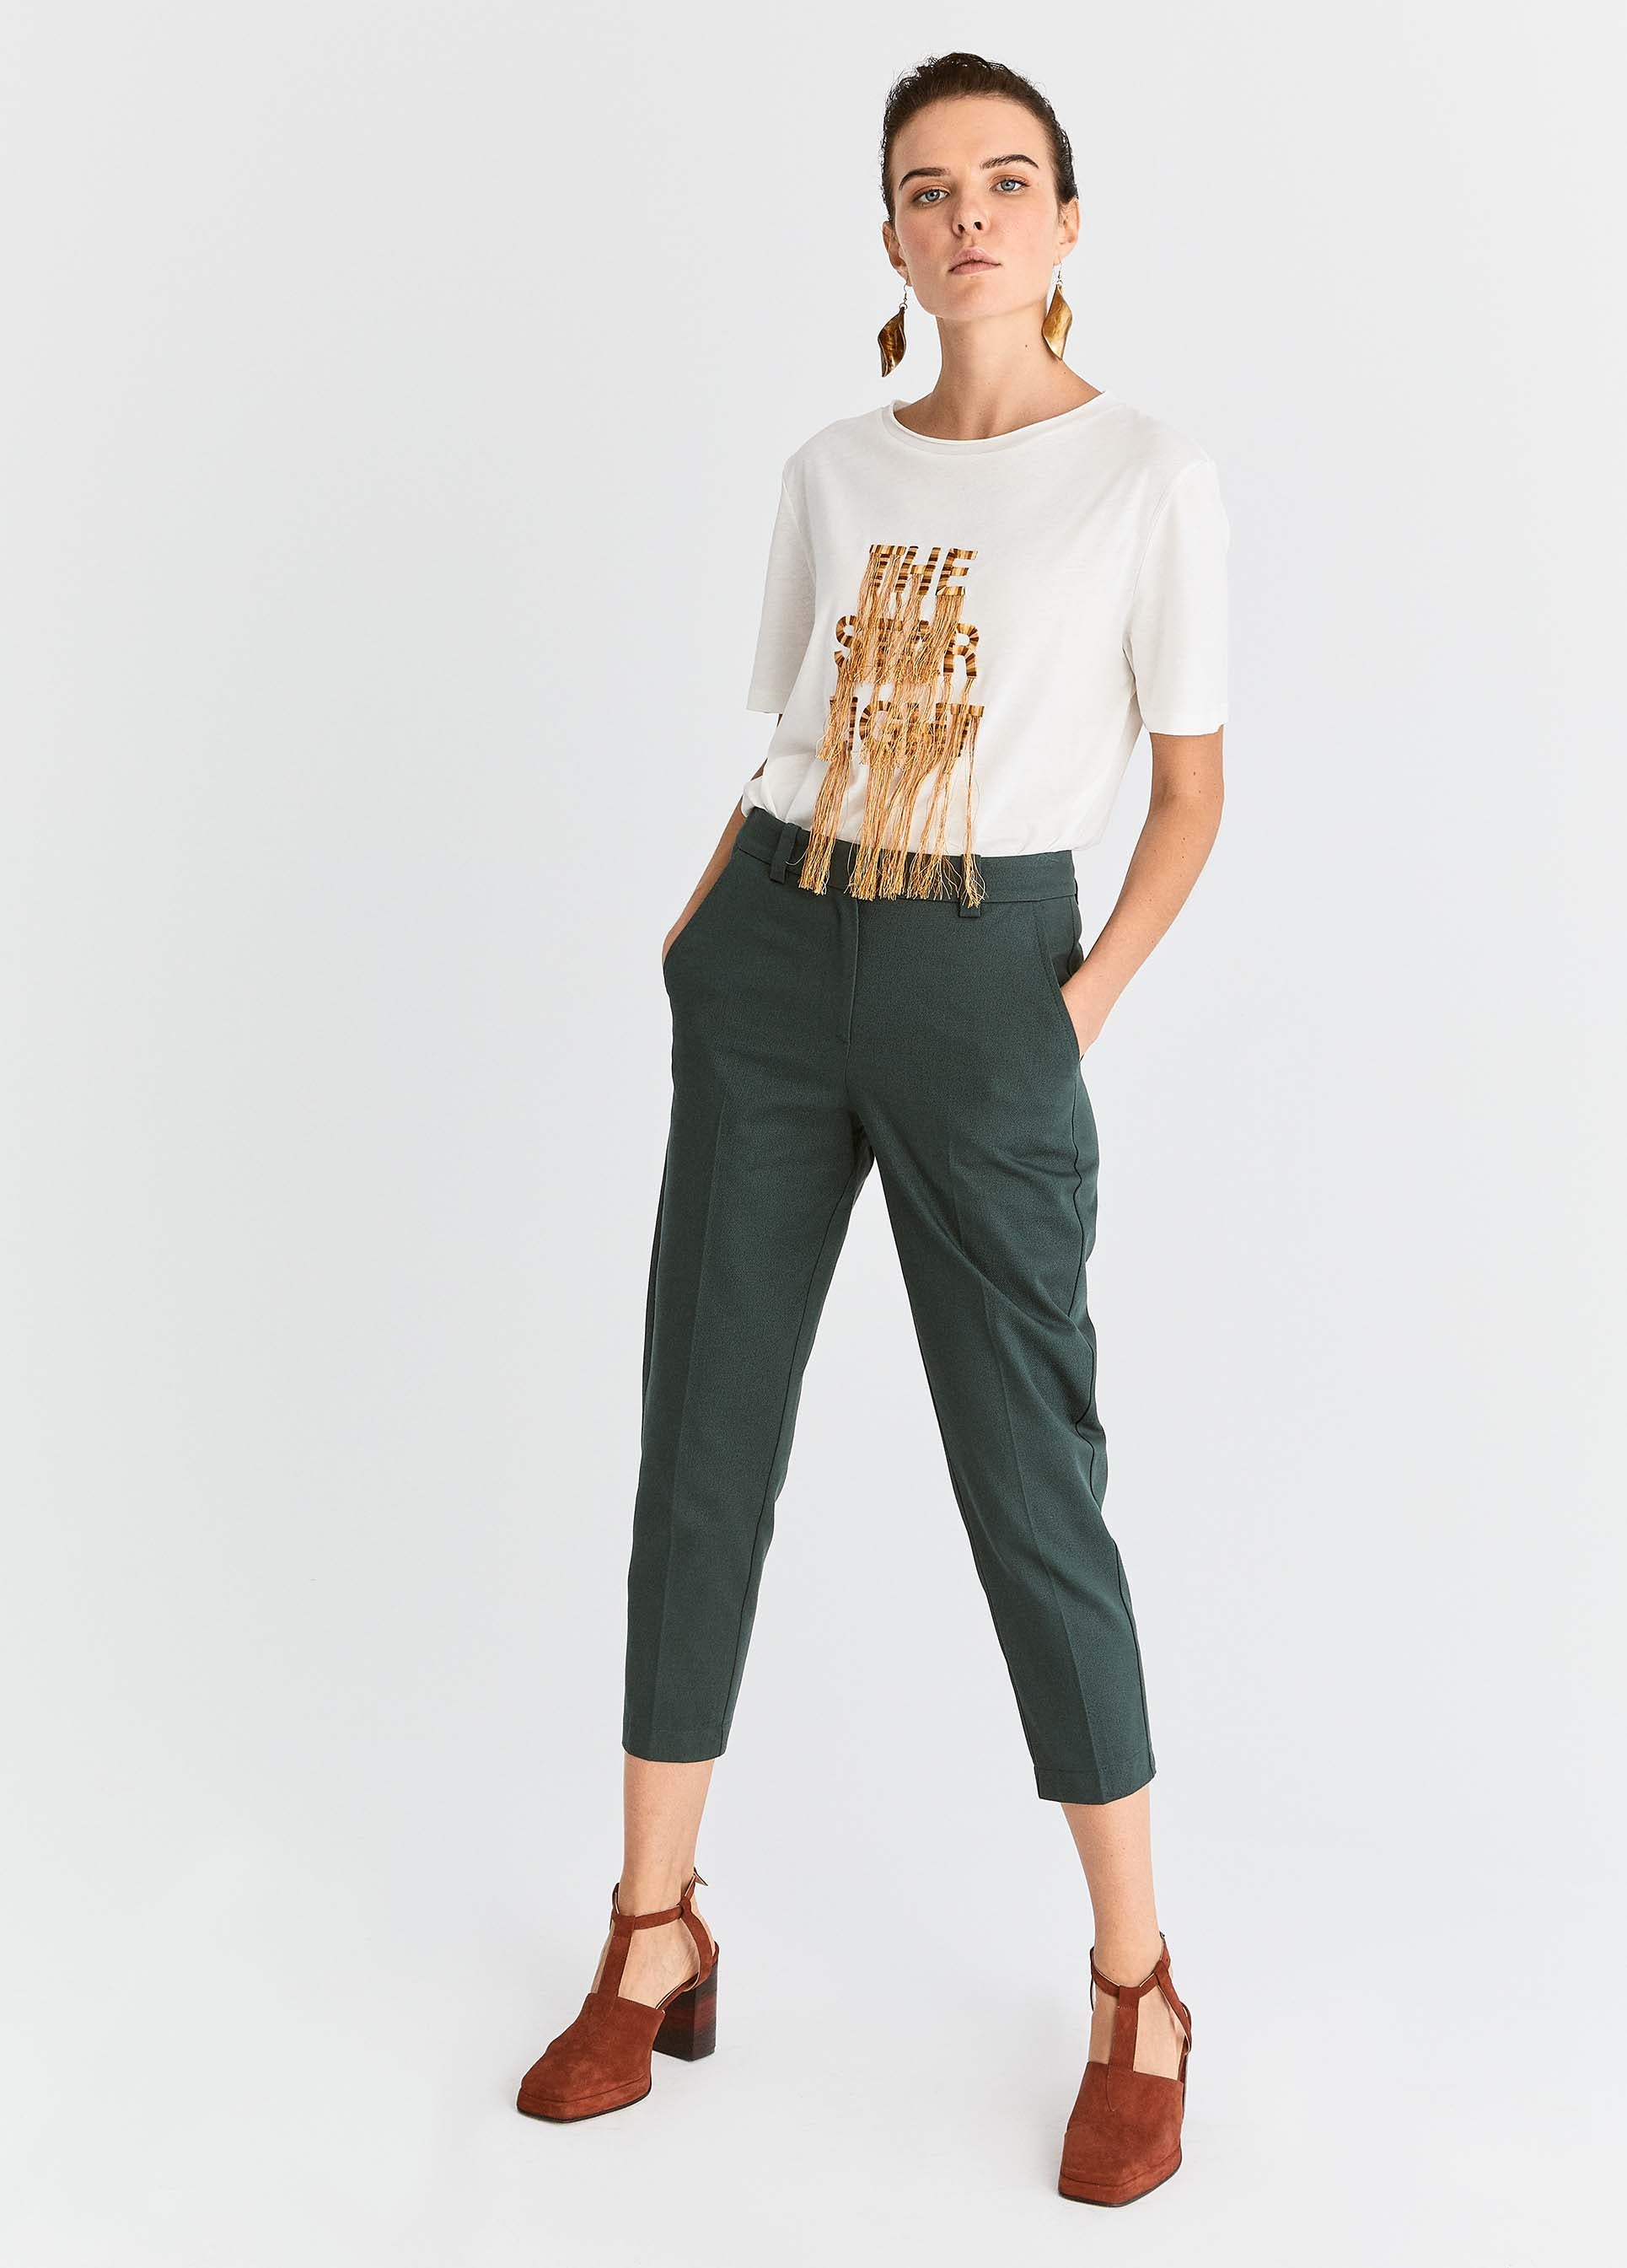 Roman Green Tapered Cropped Pant. 1